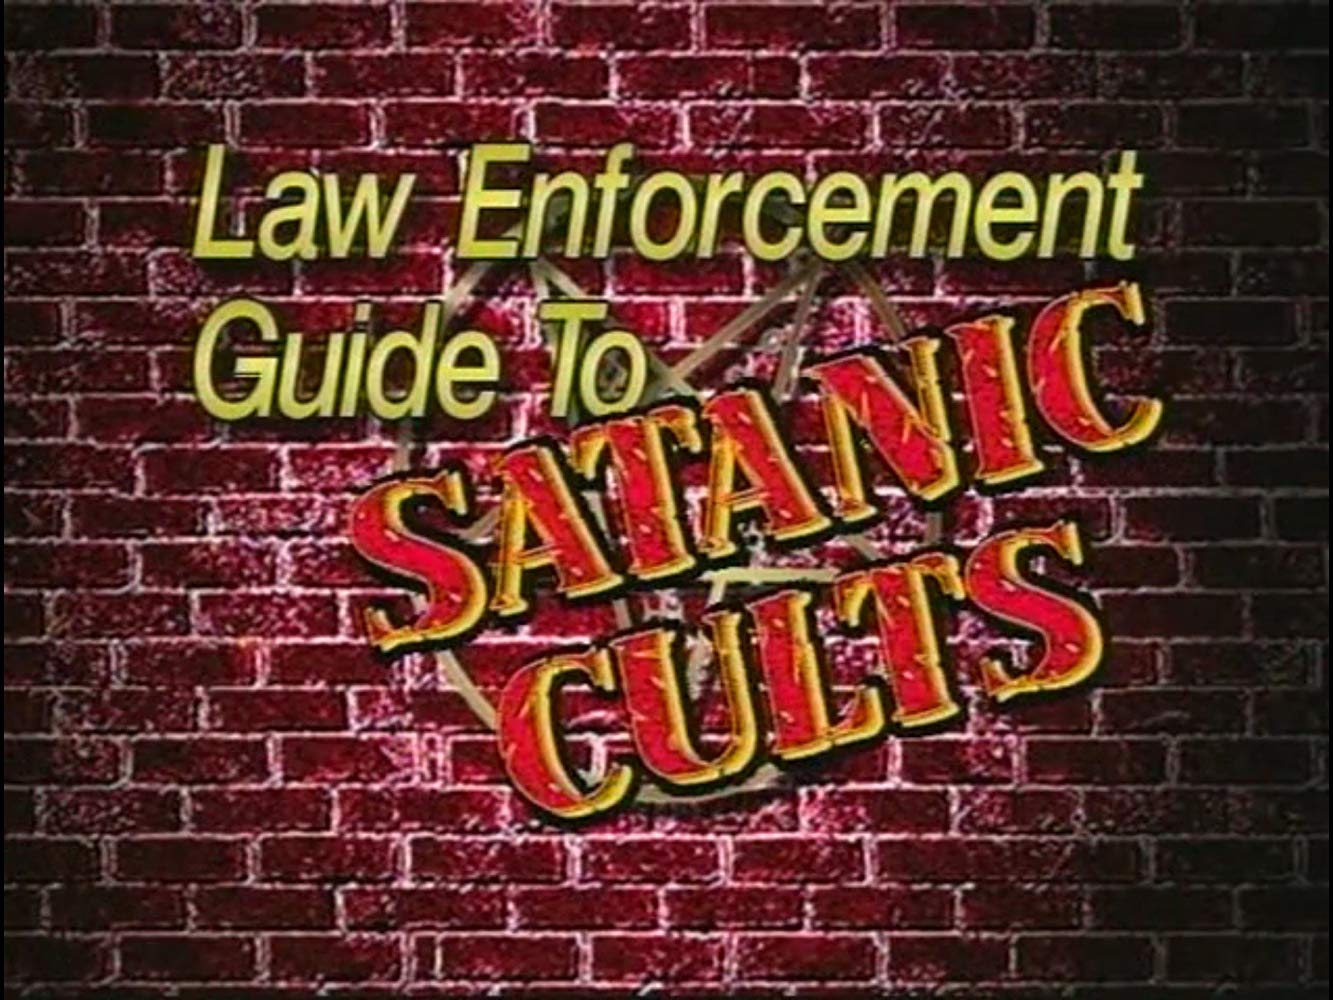 Law Enforcement Guide To Satanic Cults